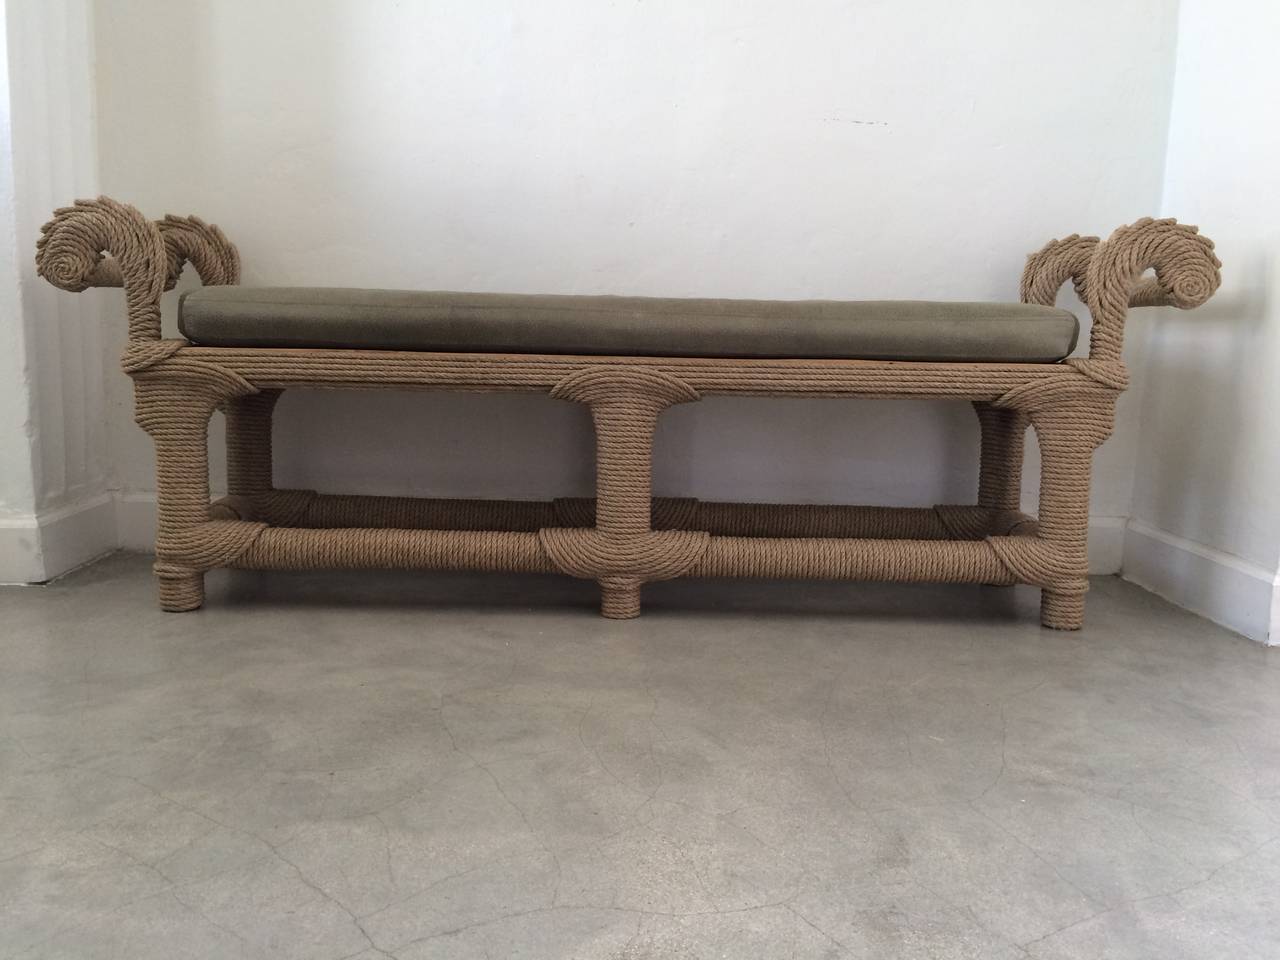 "Moissu Bench" in natural hemp rope with a custom green leather cushion by Christian Astuguevieille, signed.